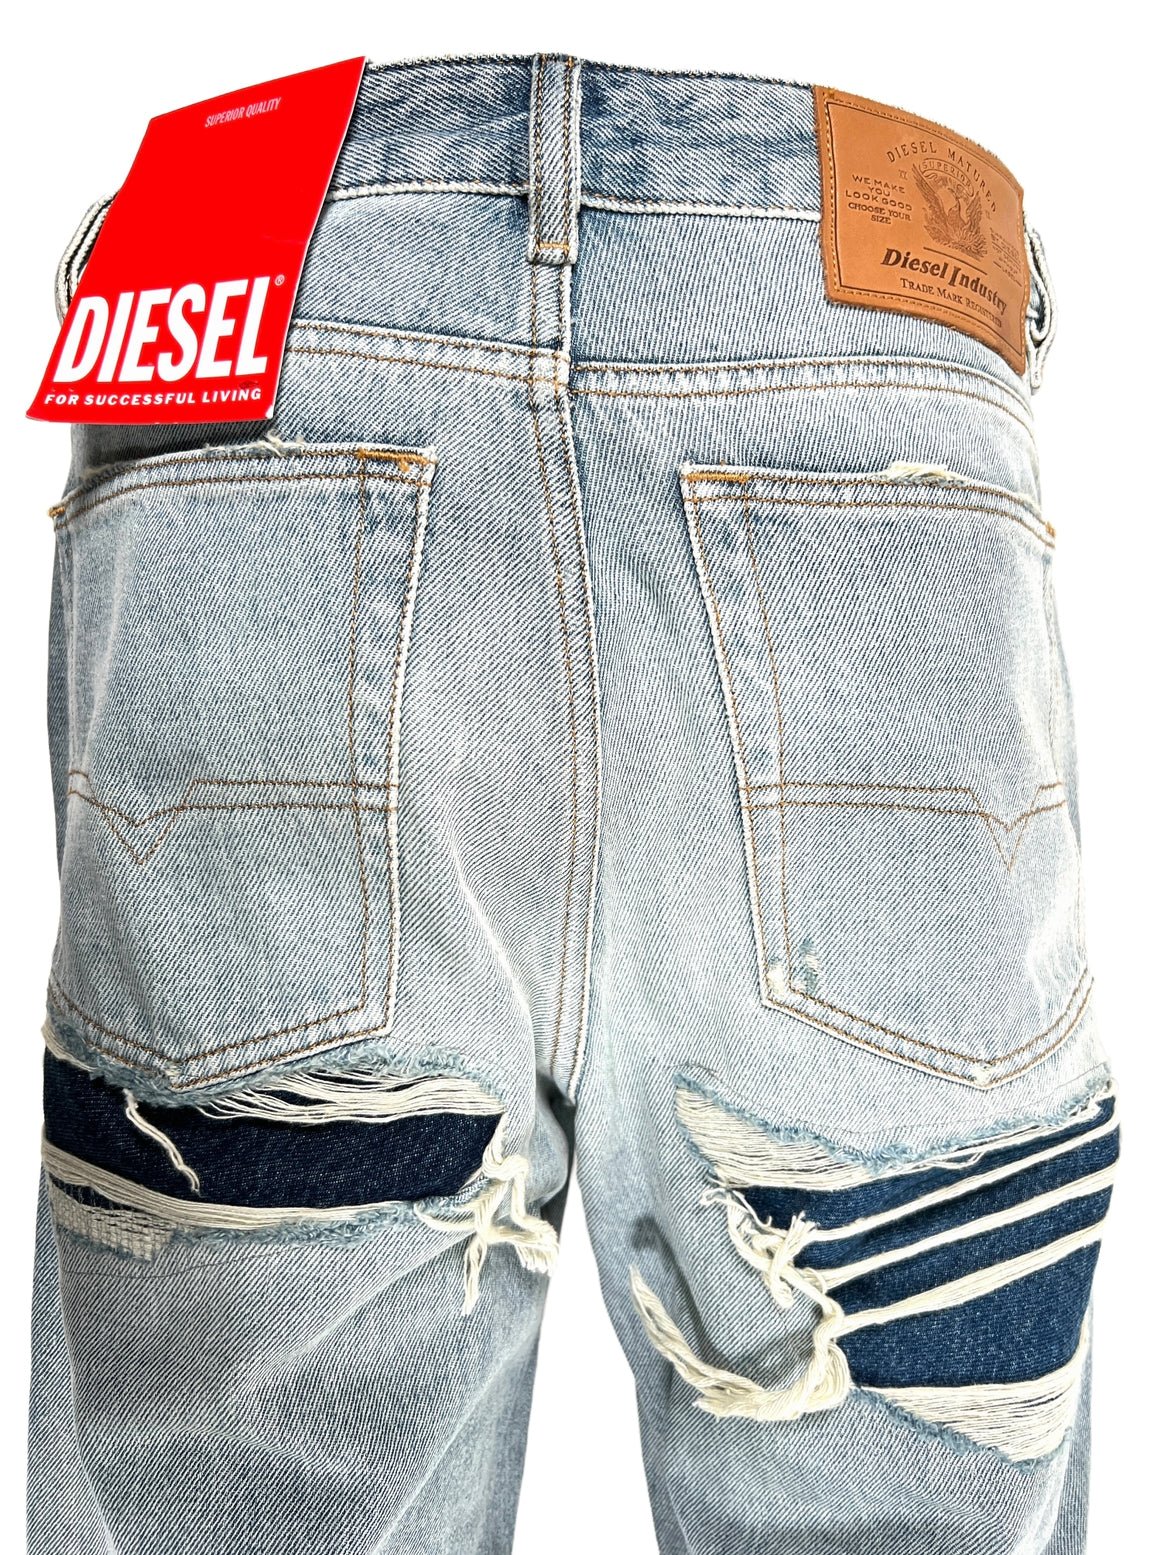 A pair of DIESEL light blue jeans with a tag on the back.